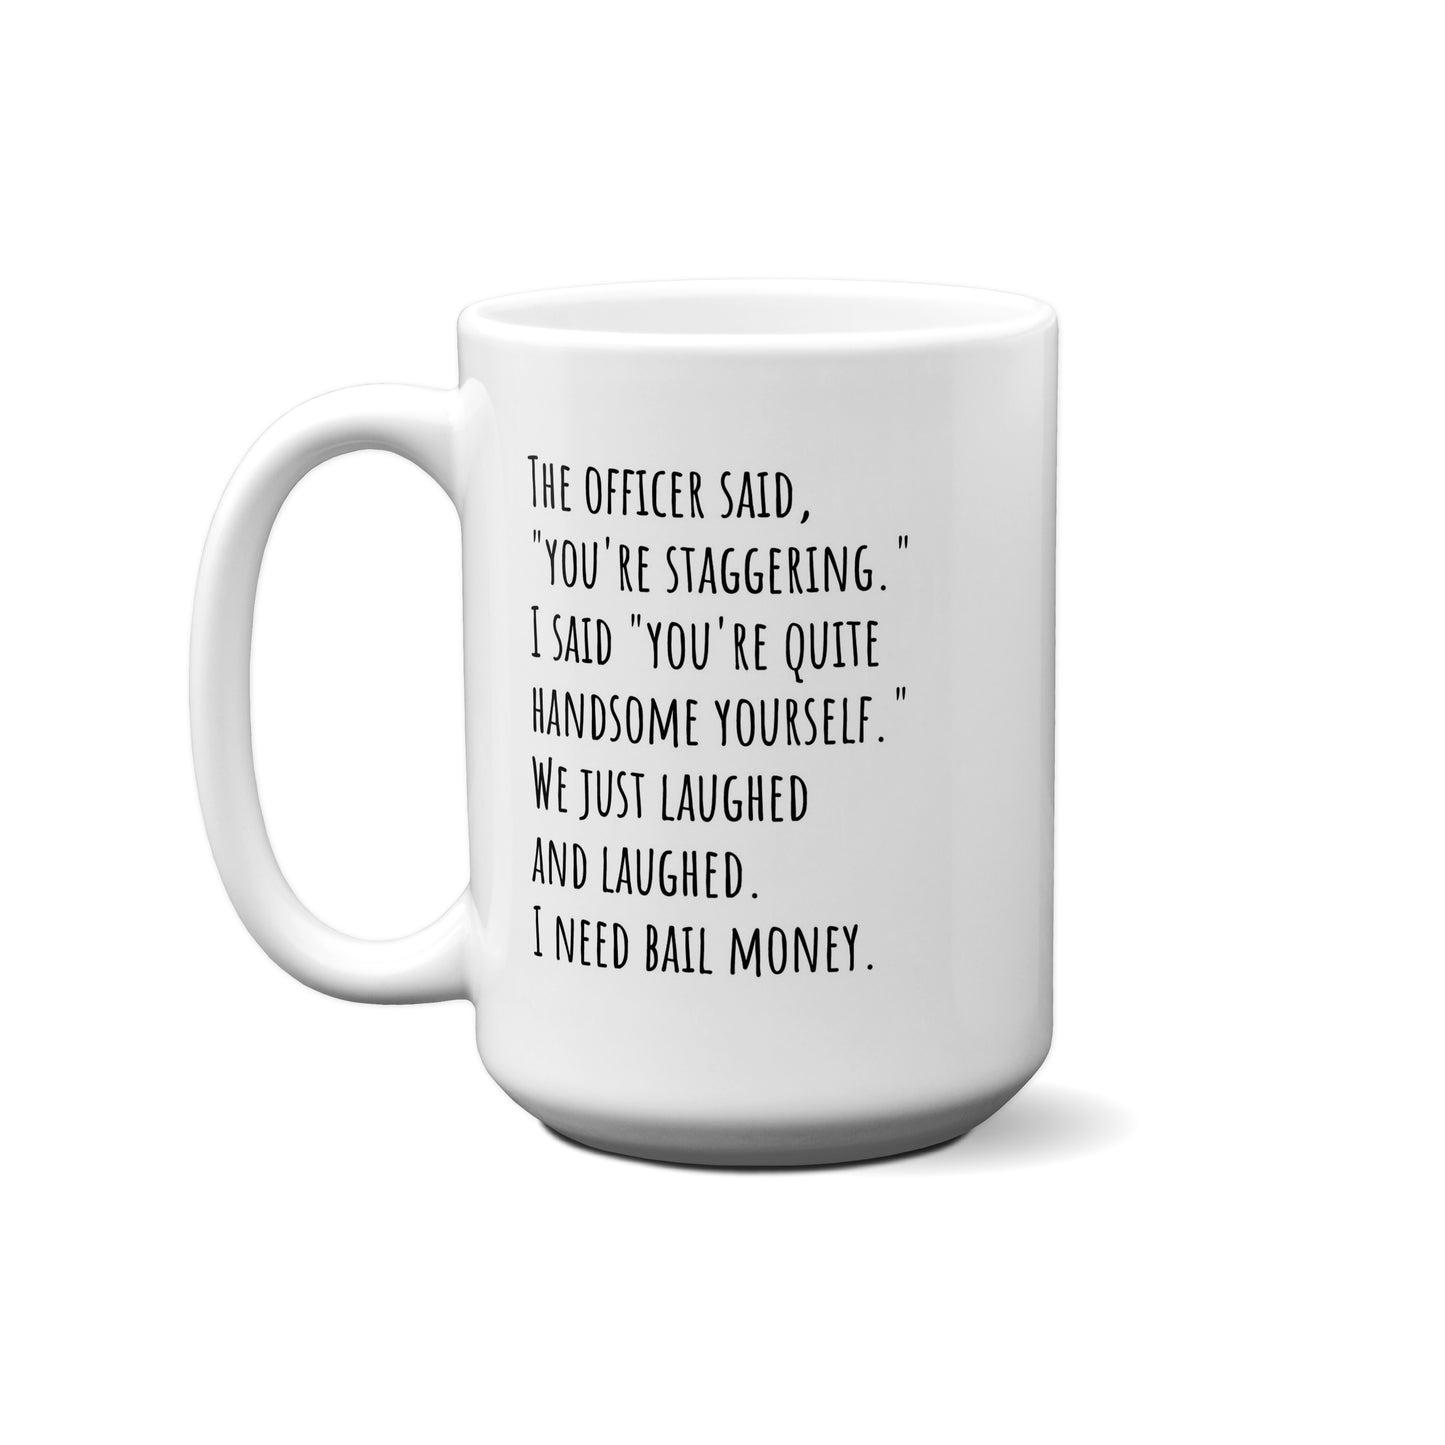 The Officer Said, "You're Staggering." I Said "You're ... Quote Mug